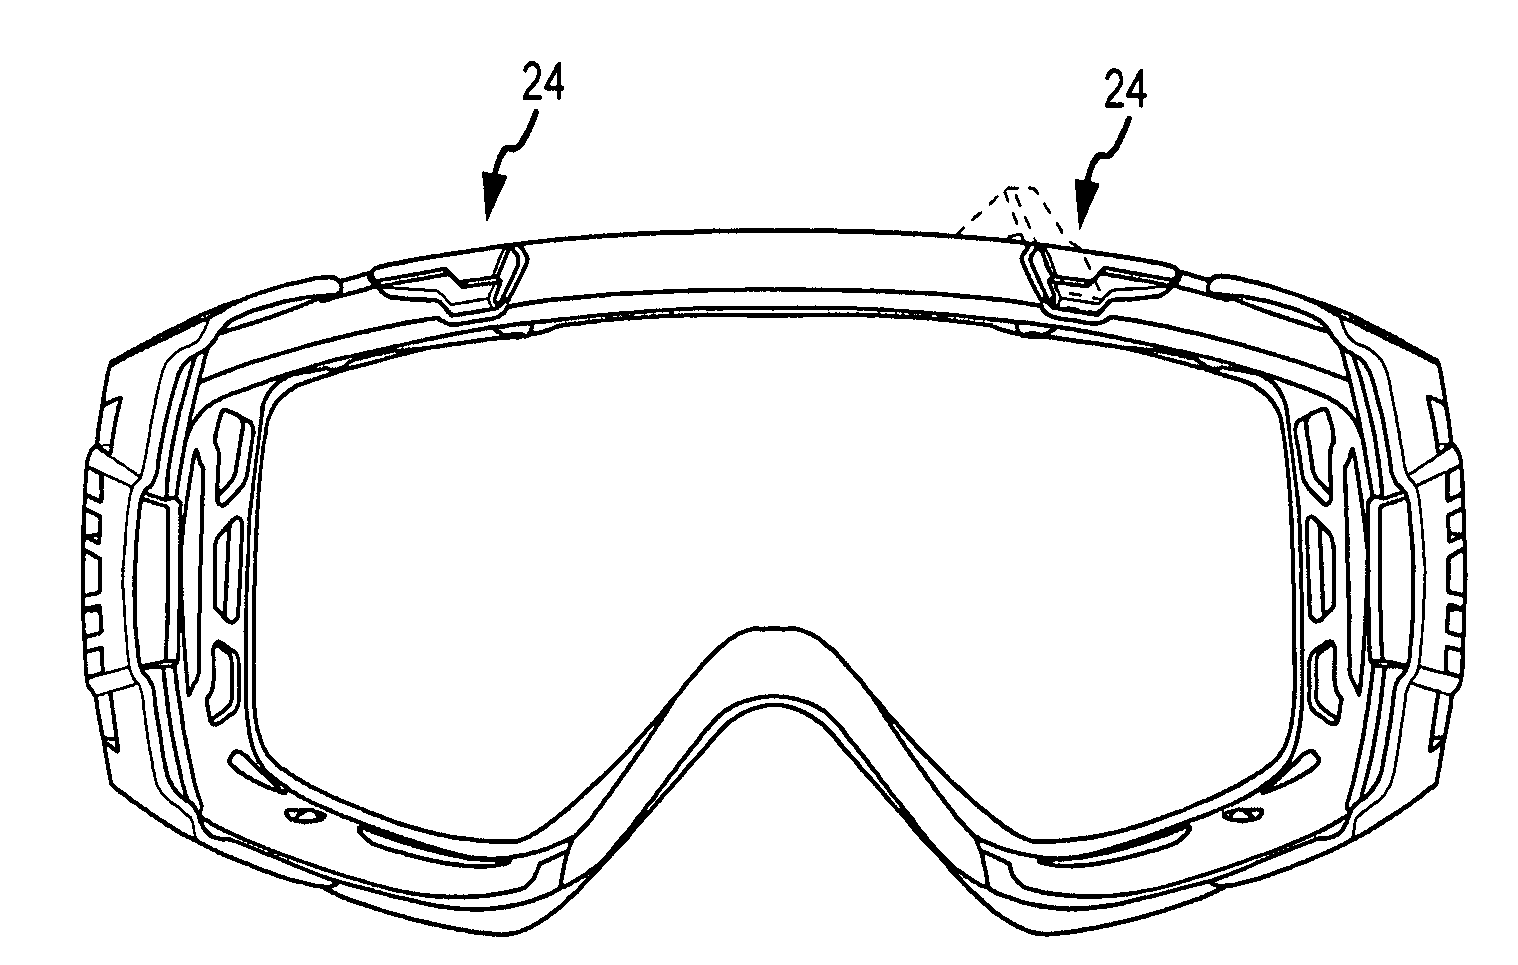 Goggle lens attachment system and method